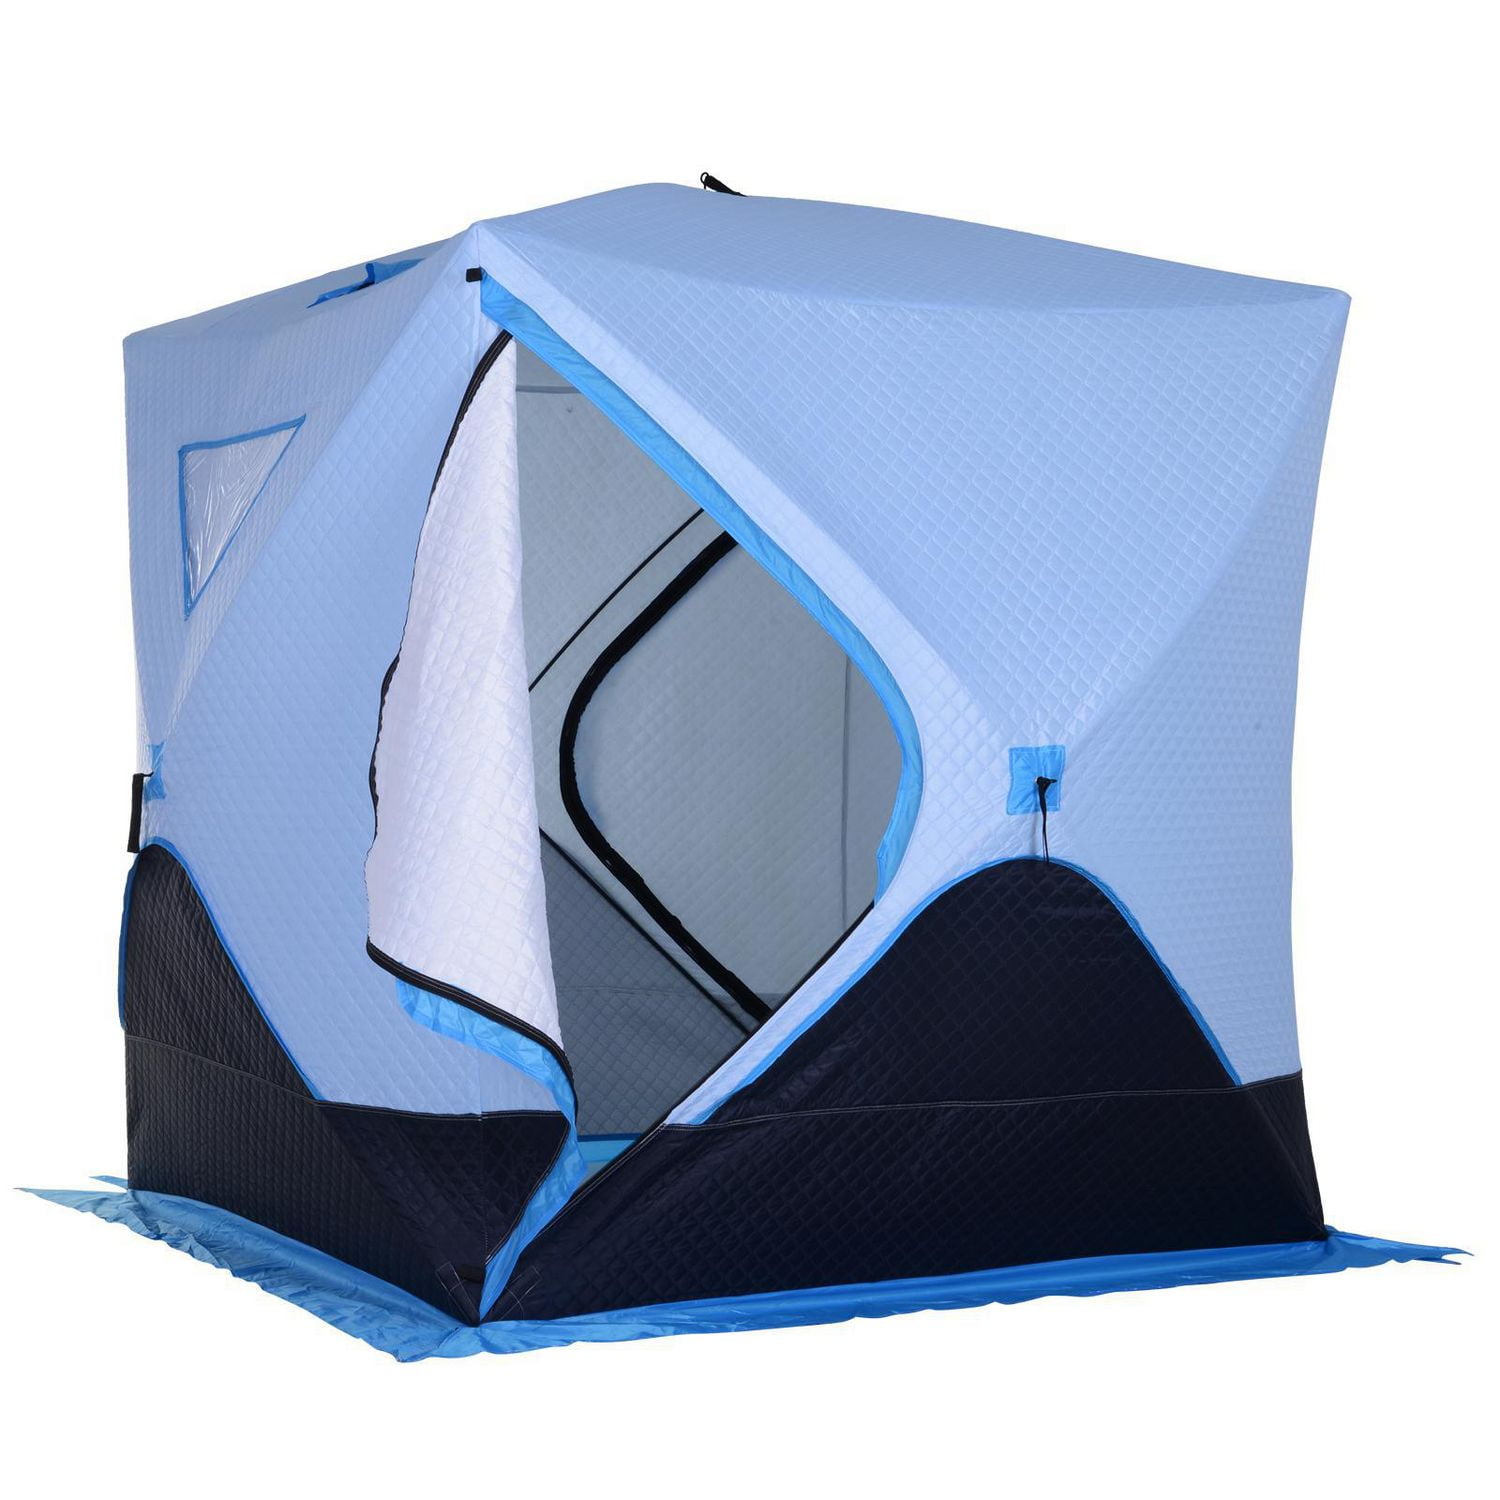 Buy Goture Insulated Ice Fishing Shelter 4-6 Person,420D Water-Resistant Ice  Fishing Tent,Portable Pop-Up Ice Fishing Shanty,Thermal Hub Ice Tents with  Carrying Bag, Ice Anchors Online at Low Prices in India 